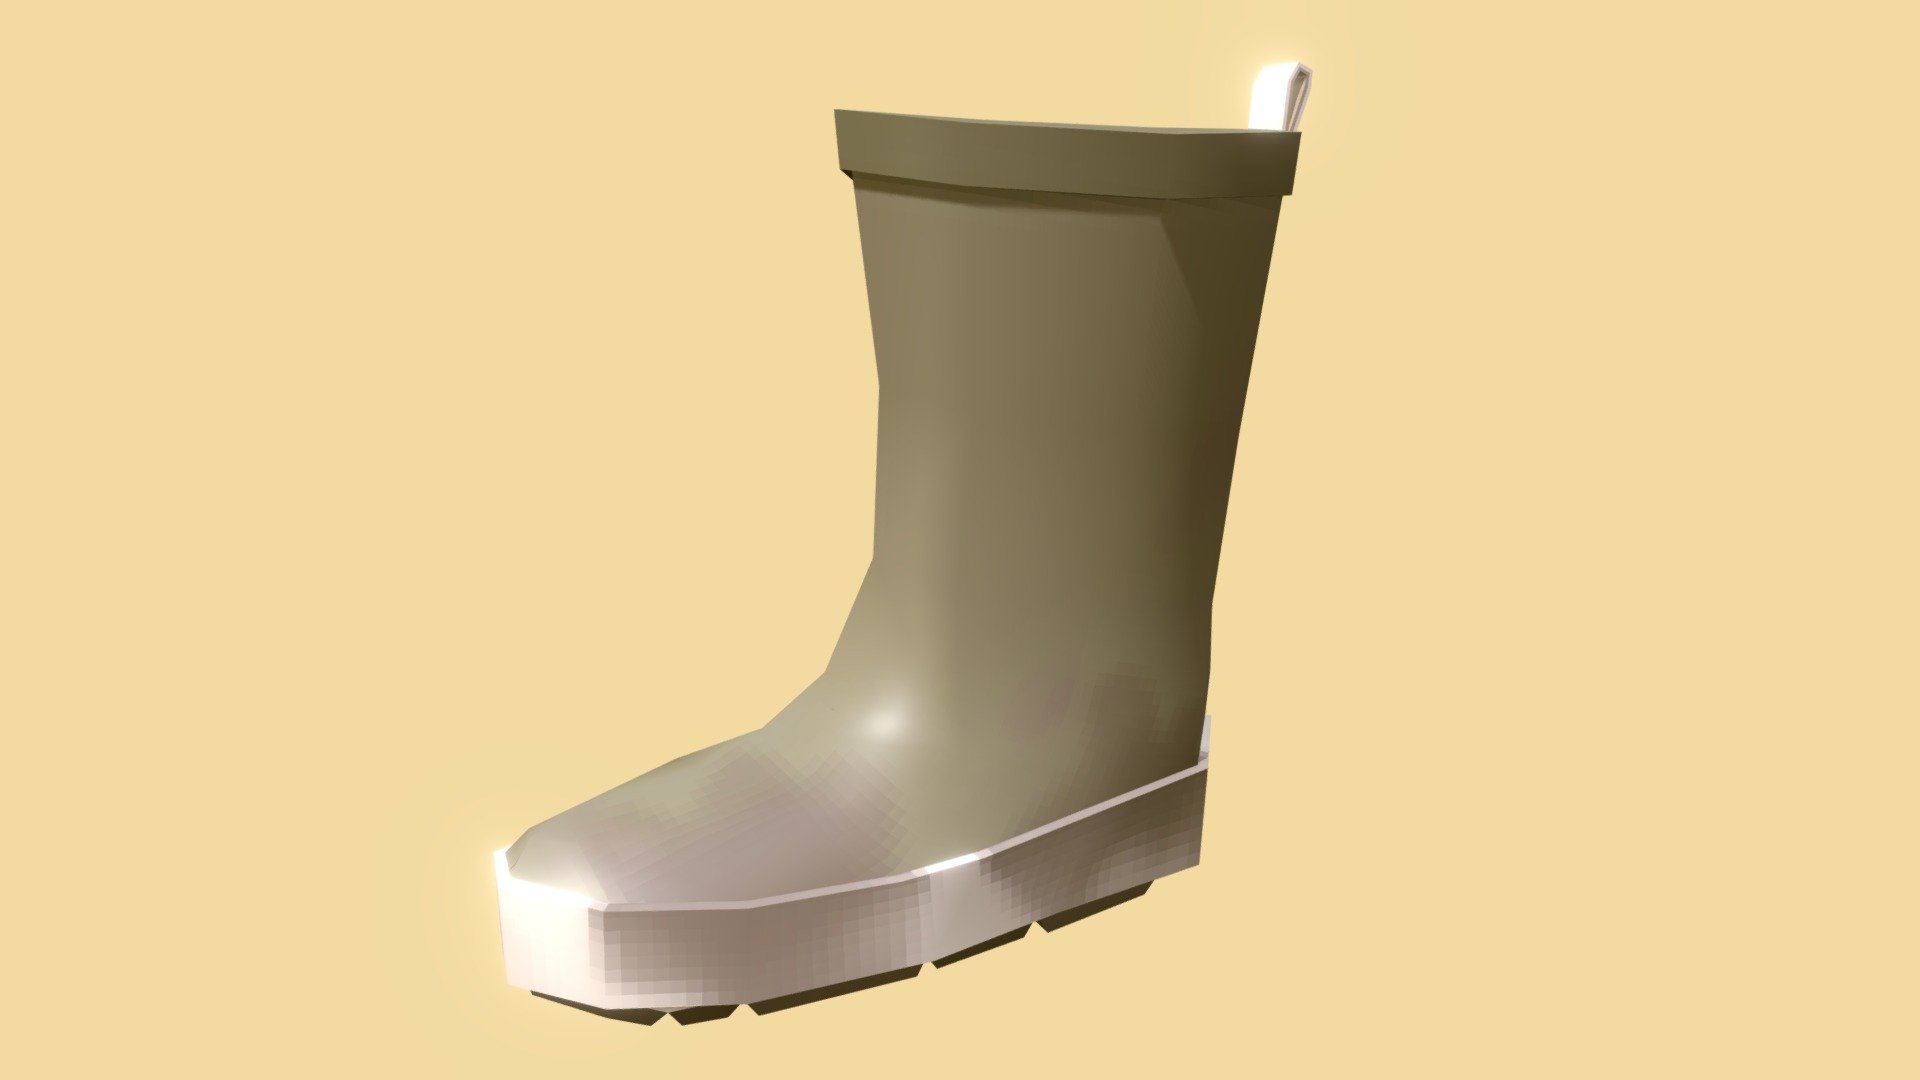 Muddy Low-Poly Gumboot - Download Free 3D model by yeeko [6a4e8c2 ...